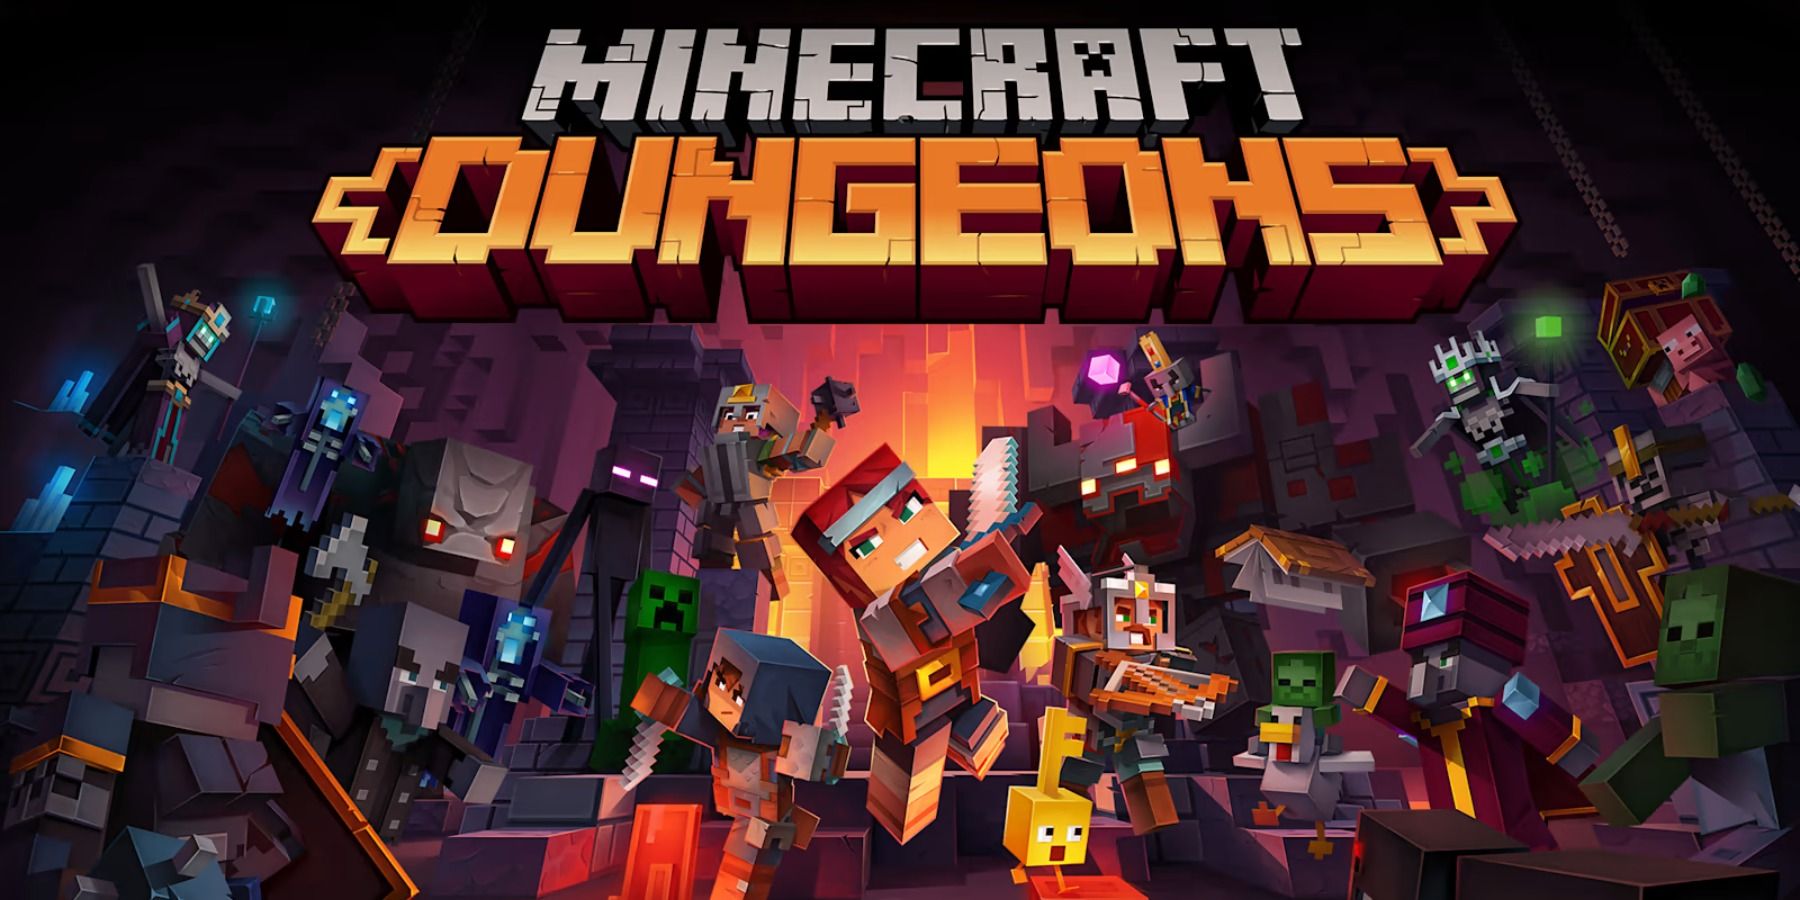 Four player characters battle through enemies on the cover art for Minecraft Dungeons